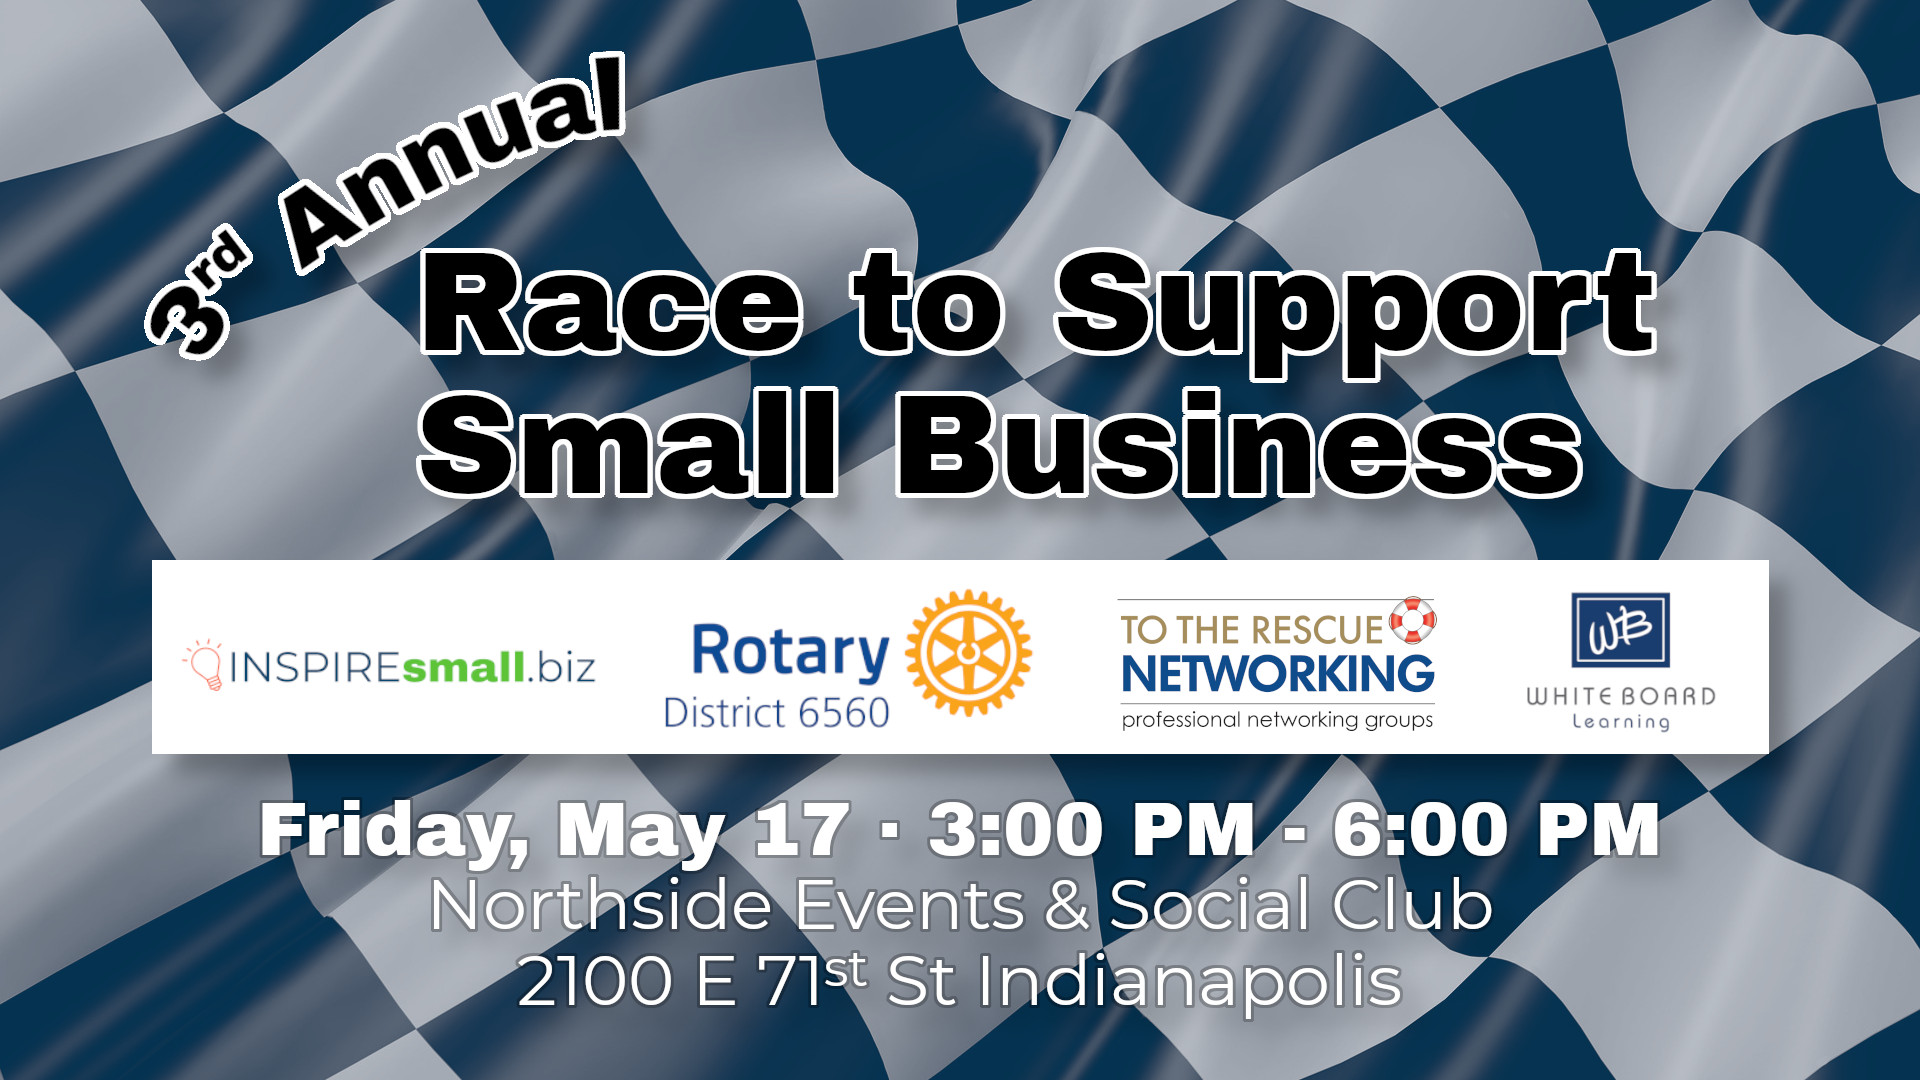 The 3rd Annual Race to Support Small Business!